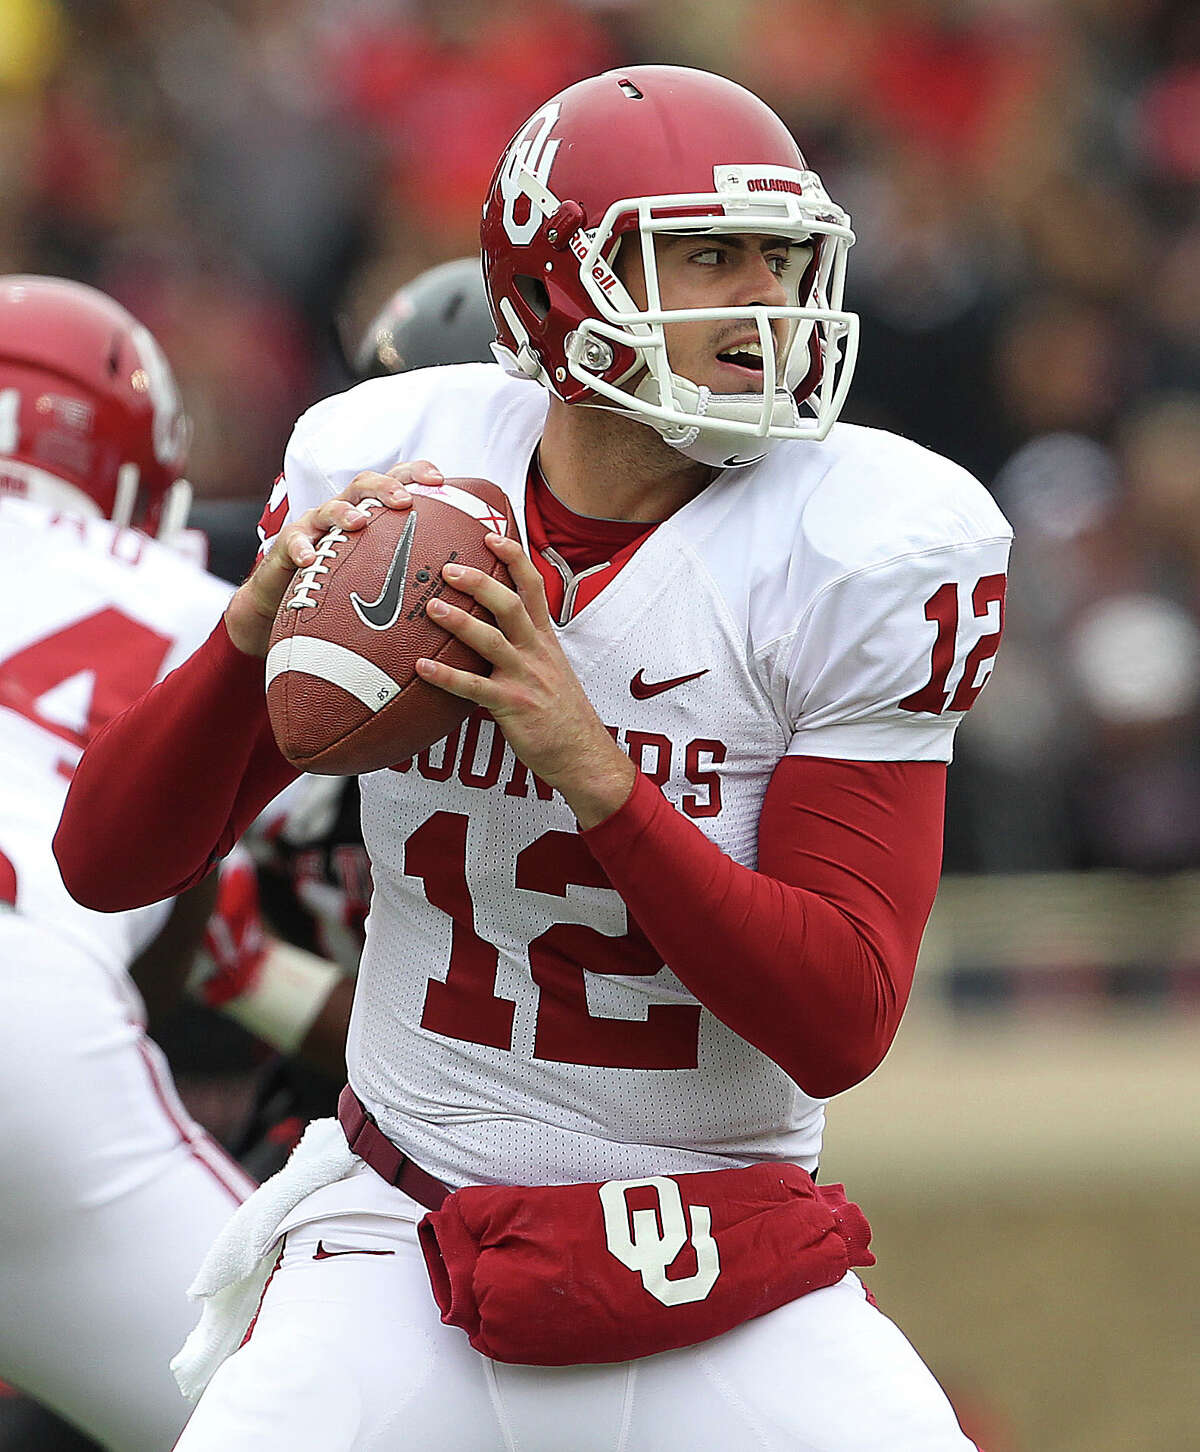 Oklahoma's Landry Jones looks to throw against Texas Tech during an NCAA college football game in Lubbock, Saturday, Oct. 6, 2012.